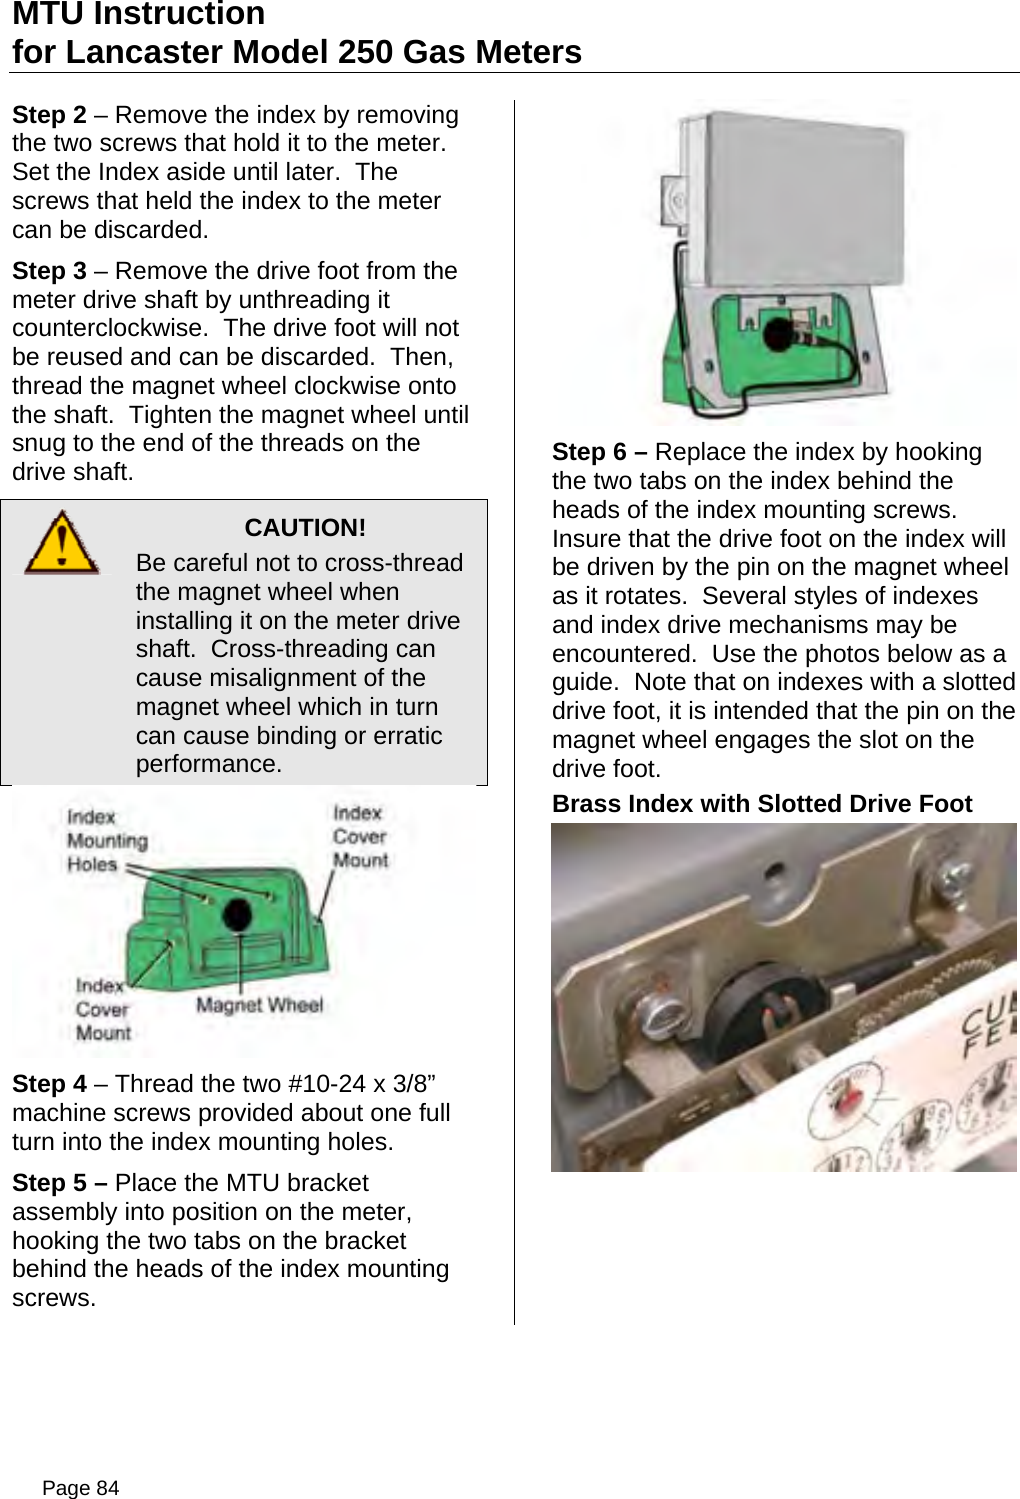 MTU Instruction for Lancaster Model 250 Gas Meters Step 2 – Remove the index by removing the two screws that hold it to the meter.  Set the Index aside until later.  The screws that held the index to the meter can be discarded. Step 3 – Remove the drive foot from the meter drive shaft by unthreading it counterclockwise.  The drive foot will not be reused and can be discarded.  Then, thread the magnet wheel clockwise onto the shaft.  Tighten the magnet wheel until snug to the end of the threads on the drive shaft.  CAUTION! Be careful not to cross-thread the magnet wheel when installing it on the meter drive shaft.  Cross-threading can cause misalignment of the magnet wheel which in turn can cause binding or erratic performance.  Step 4 – Thread the two #10-24 x 3/8” machine screws provided about one full turn into the index mounting holes. Step 5 – Place the MTU bracket assembly into position on the meter, hooking the two tabs on the bracket behind the heads of the index mounting screws.  Step 6 – Replace the index by hooking the two tabs on the index behind the heads of the index mounting screws.  Insure that the drive foot on the index will be driven by the pin on the magnet wheel as it rotates.  Several styles of indexes and index drive mechanisms may be encountered.  Use the photos below as a guide.  Note that on indexes with a slotted drive foot, it is intended that the pin on the magnet wheel engages the slot on the drive foot. Brass Index with Slotted Drive Foot  Page 84